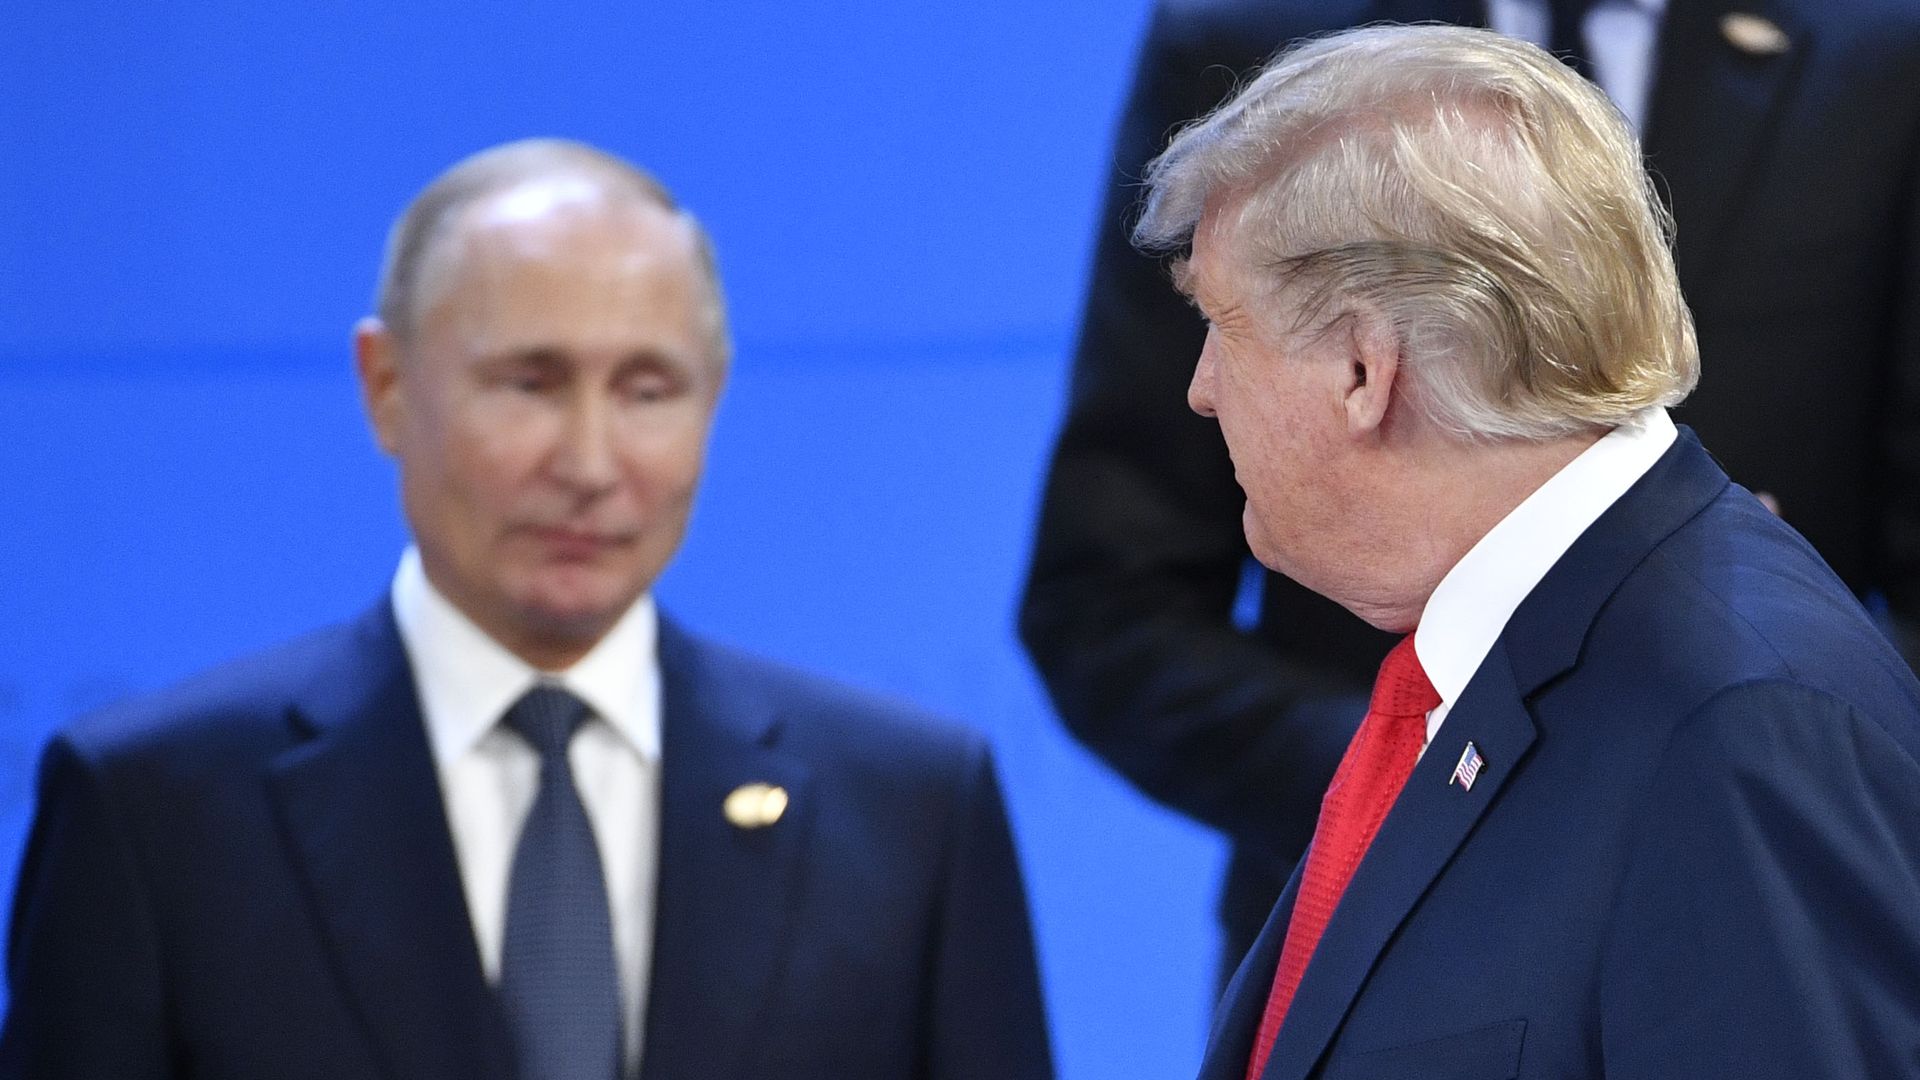 In this image, Trump walks by Putin and smiles at him.